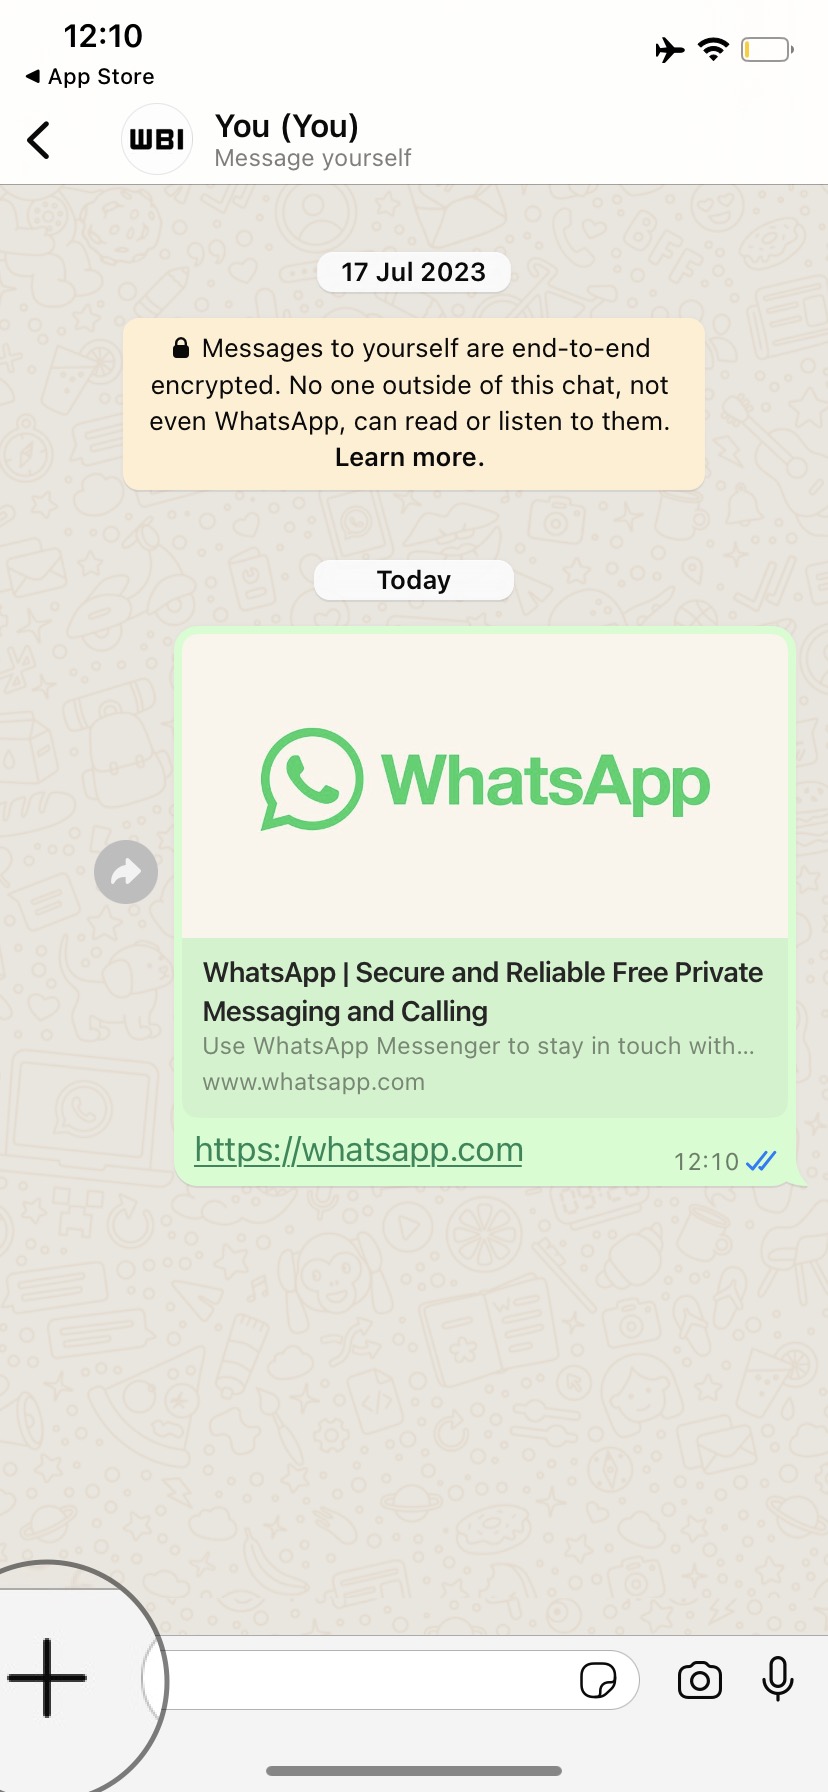 WhatsApp Testing Out New Photo Sharing Shortcut for Easier Access